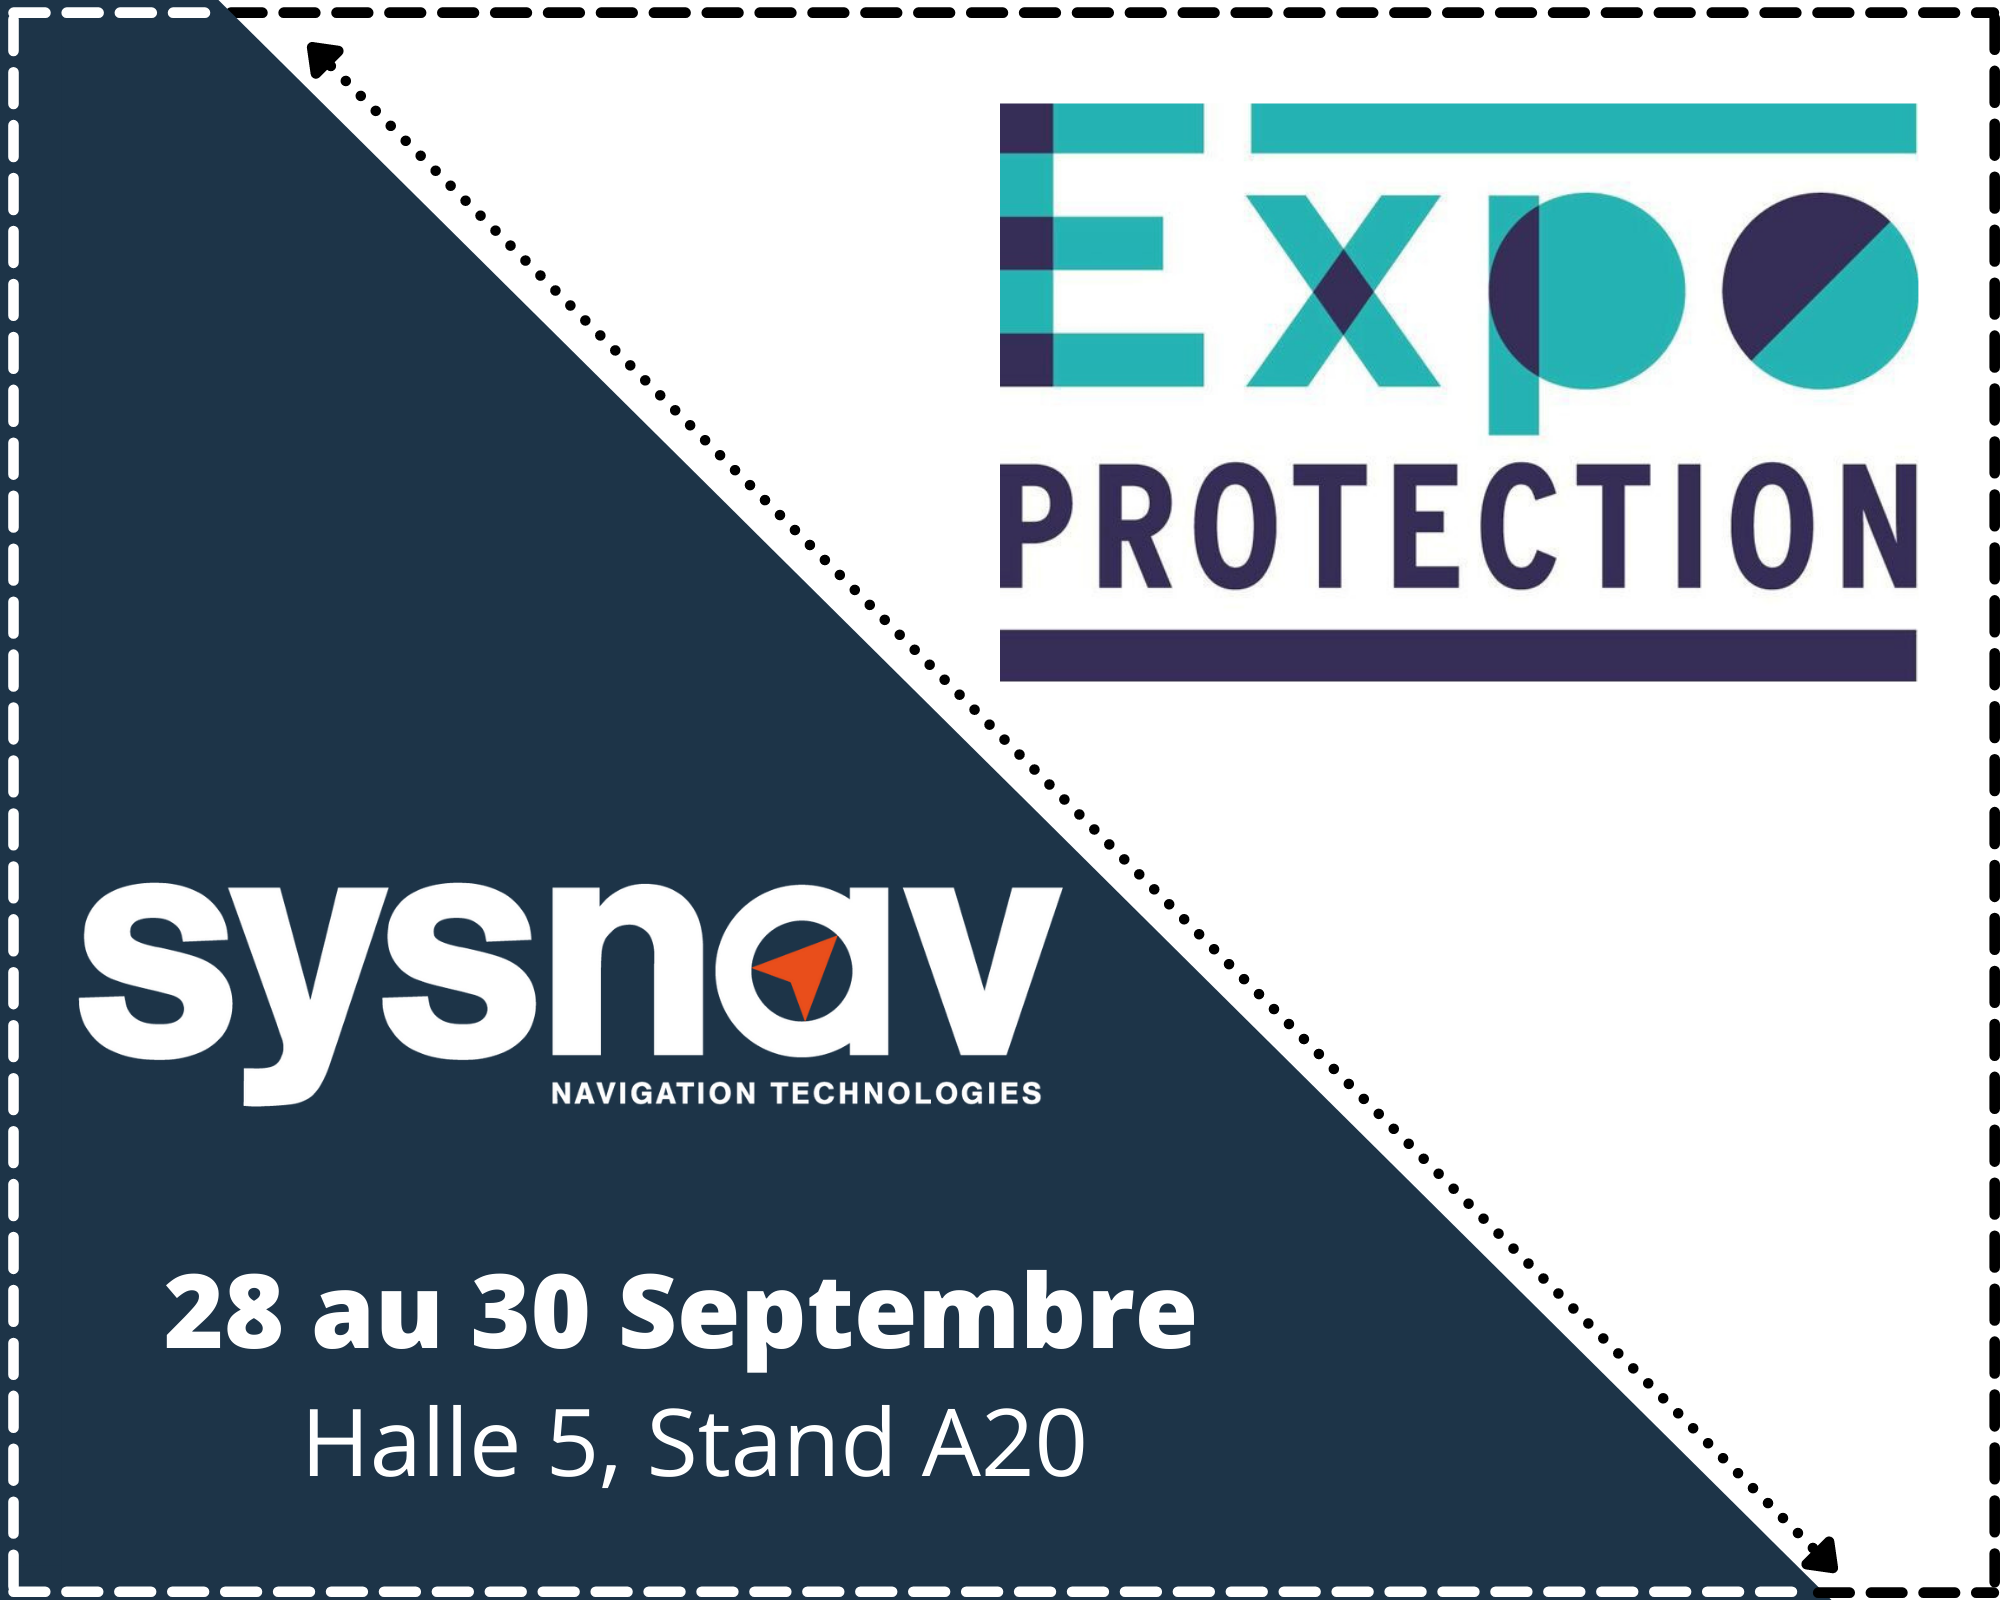 Comme meet us at ExpoProtection !